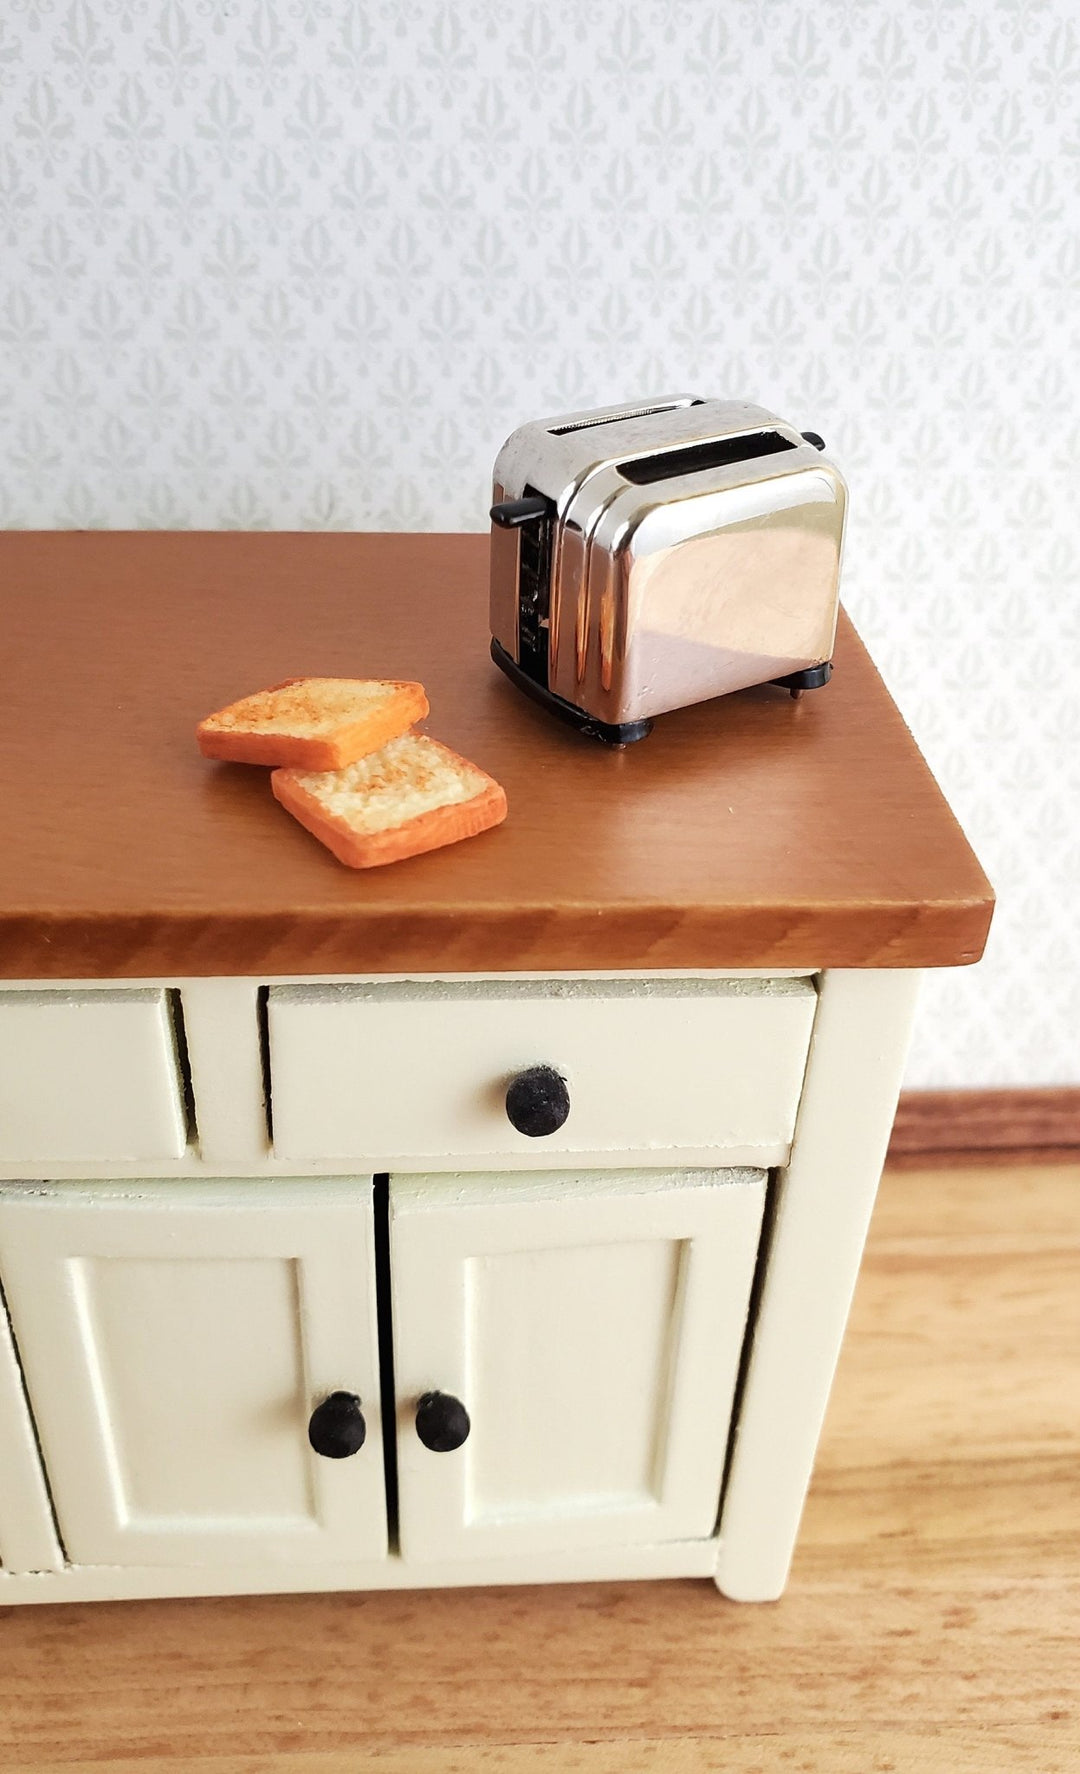 Dollhouse Miniature Silver Toaster with 2 Pieces of Toast 1:12 Scale Kitchen Accessories - Miniature Crush